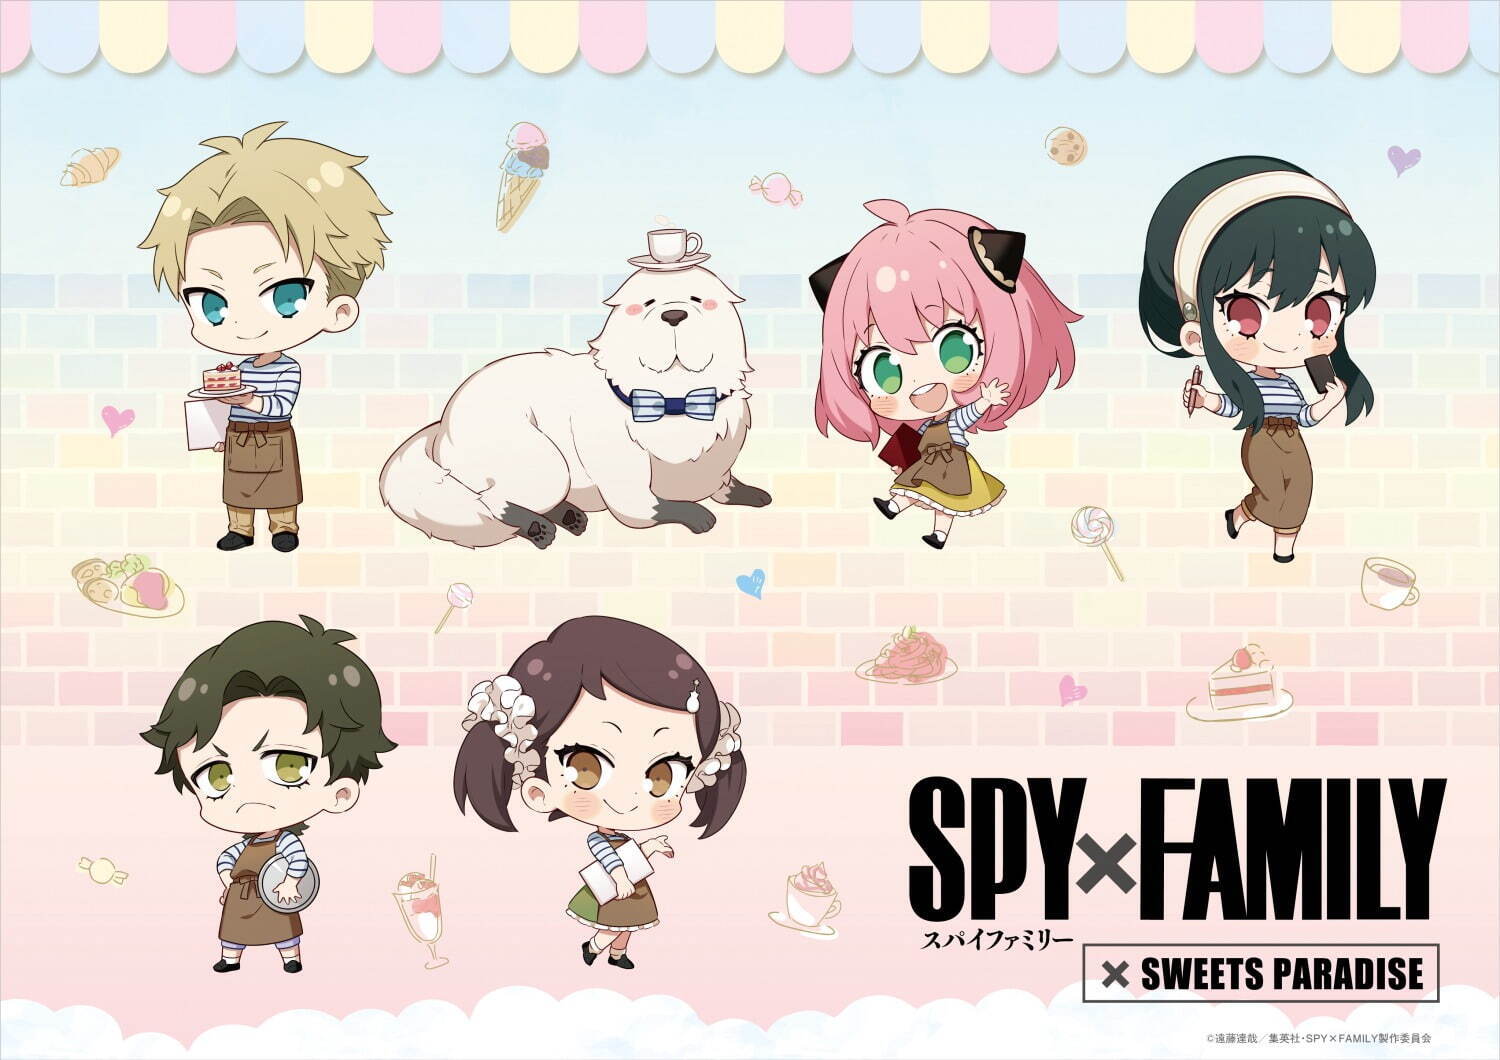 SPY×FAMILY and Sweets Paradise